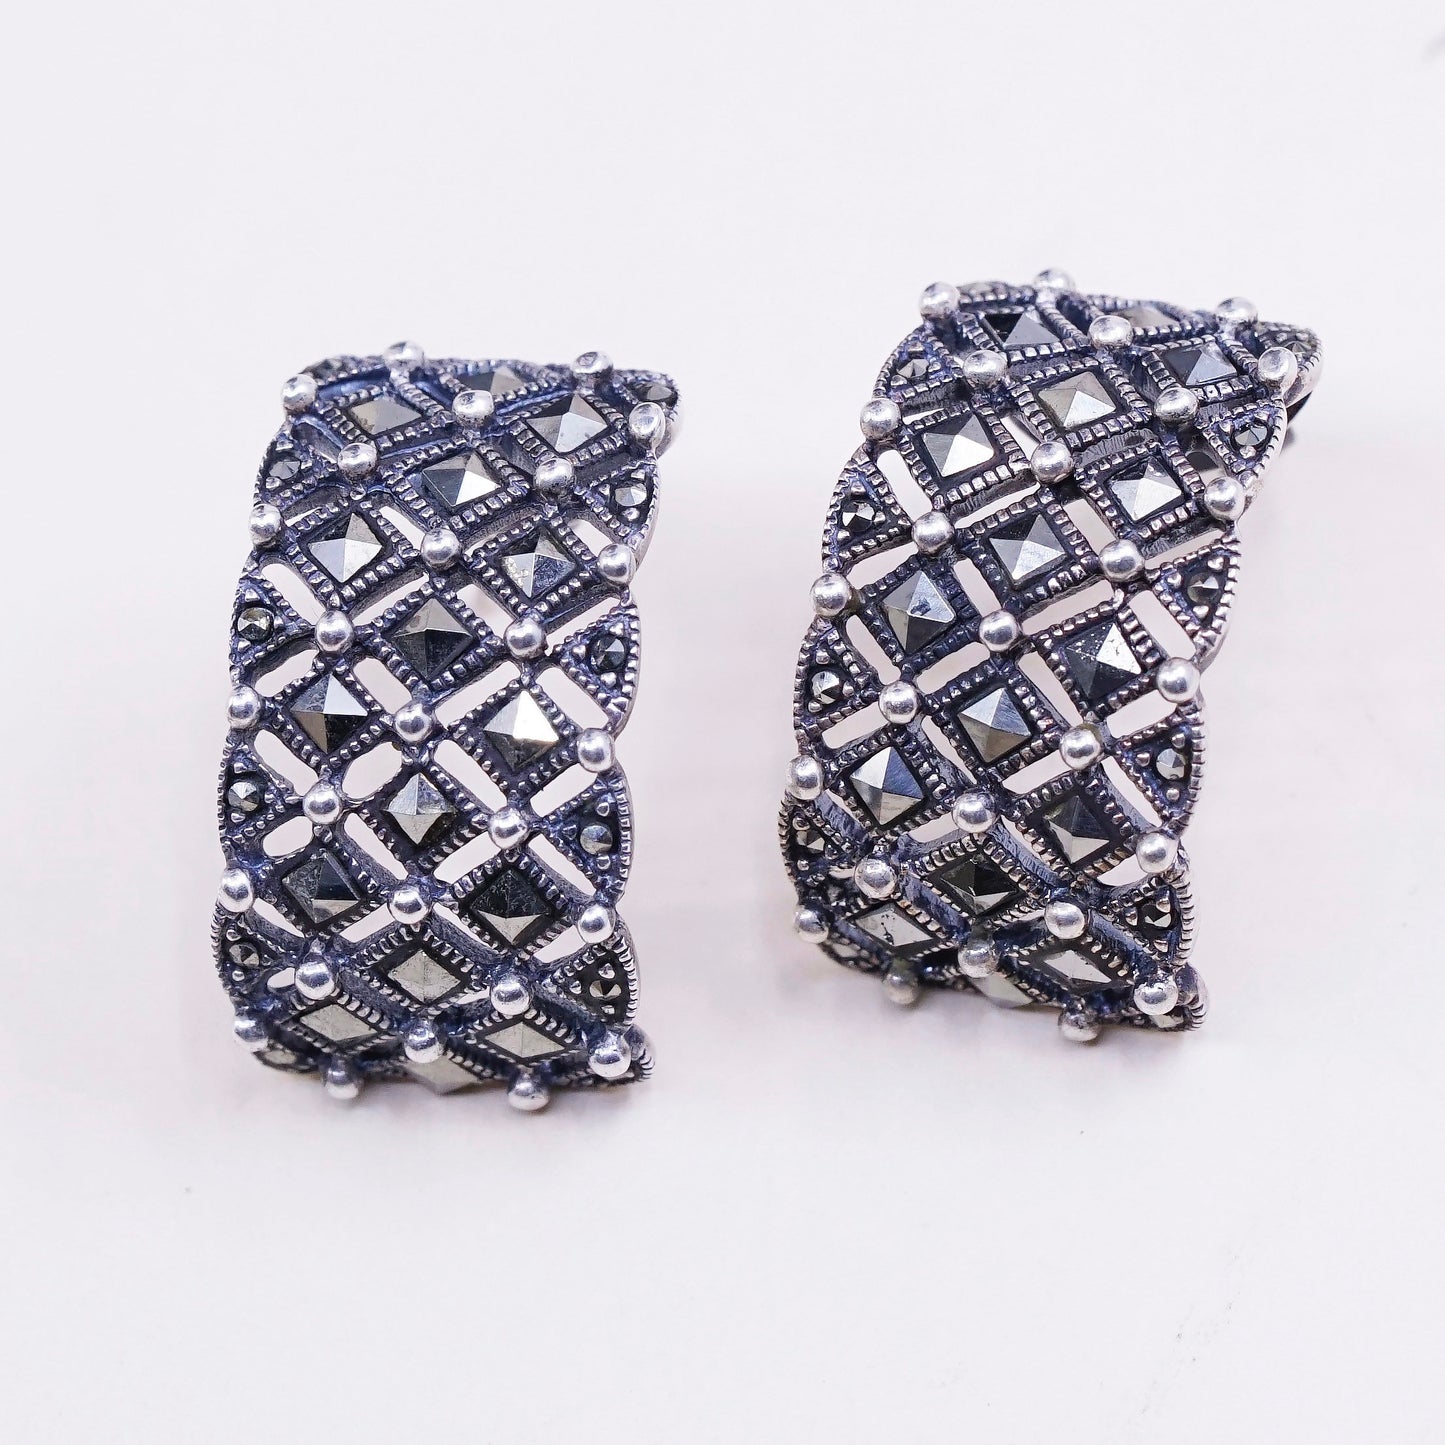 Vintage Sterling silver handmade earrings, solid 925 studs with marcasite